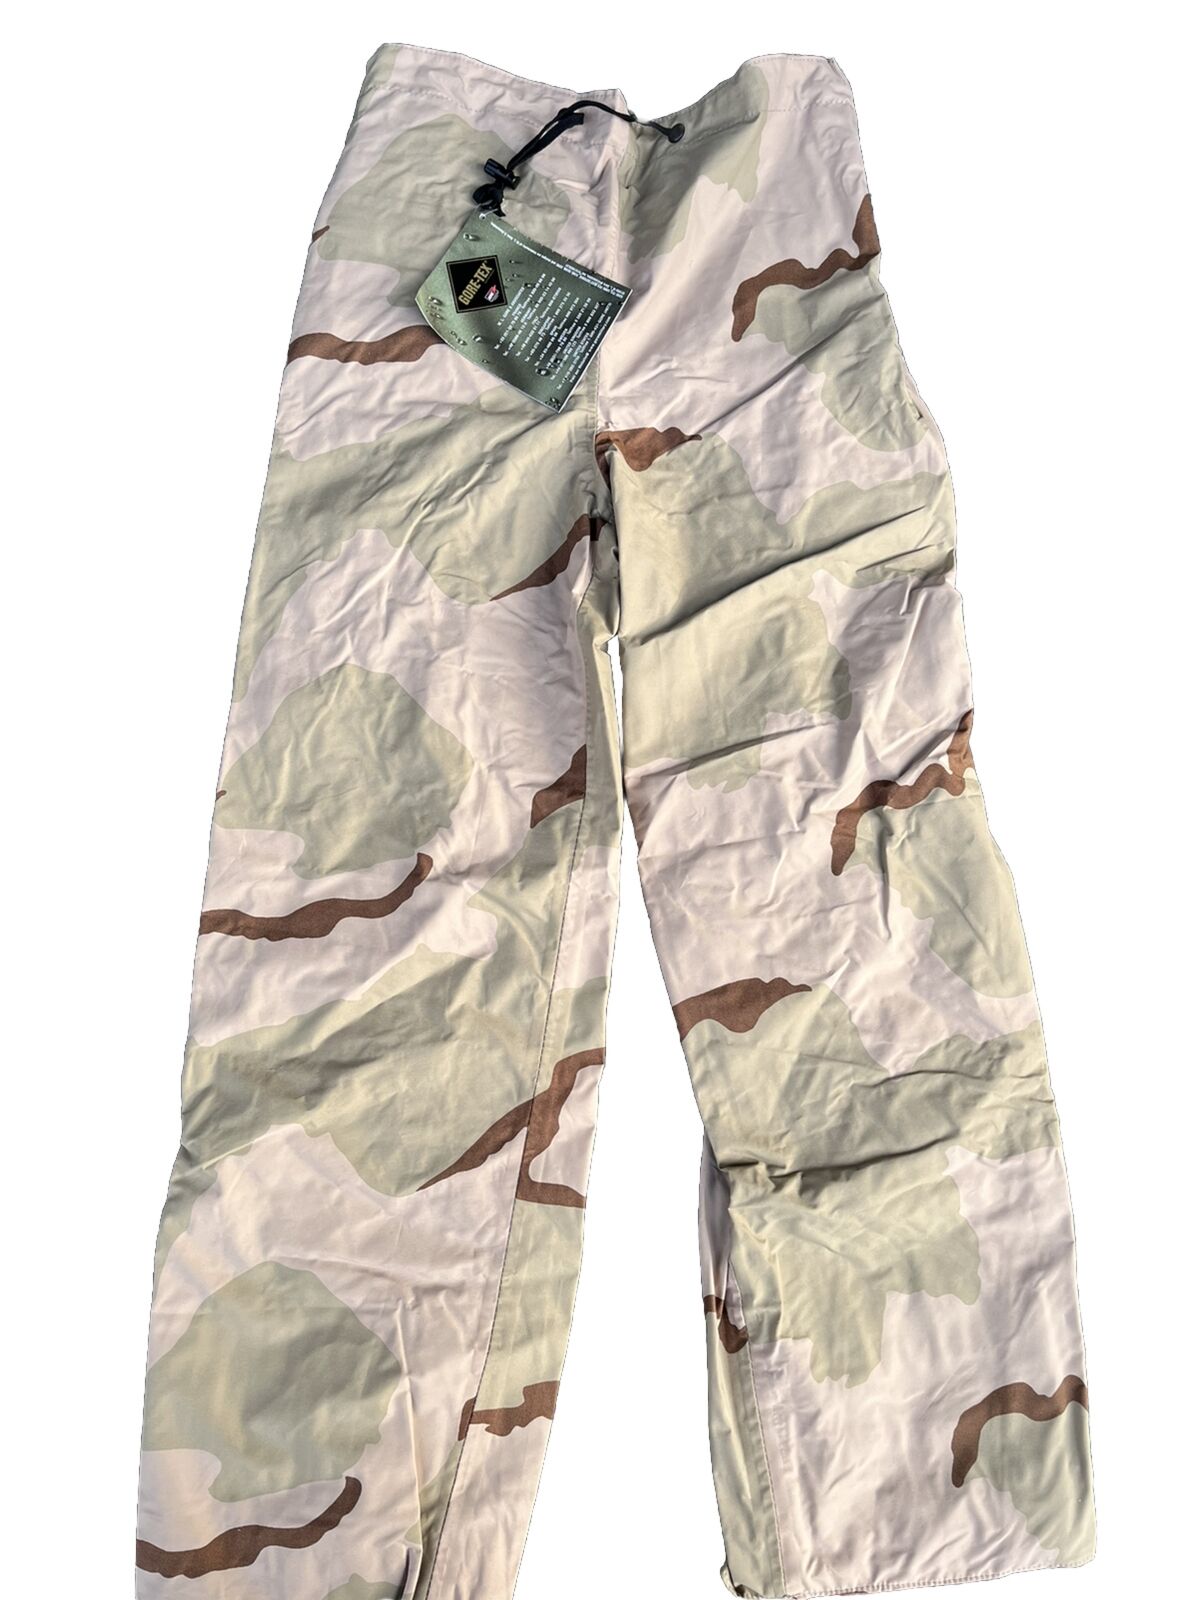 Reversible MILITARY COLD/WET WEATHER TROUSER DESERT/Night GORE-TEX PANTS MD Reg